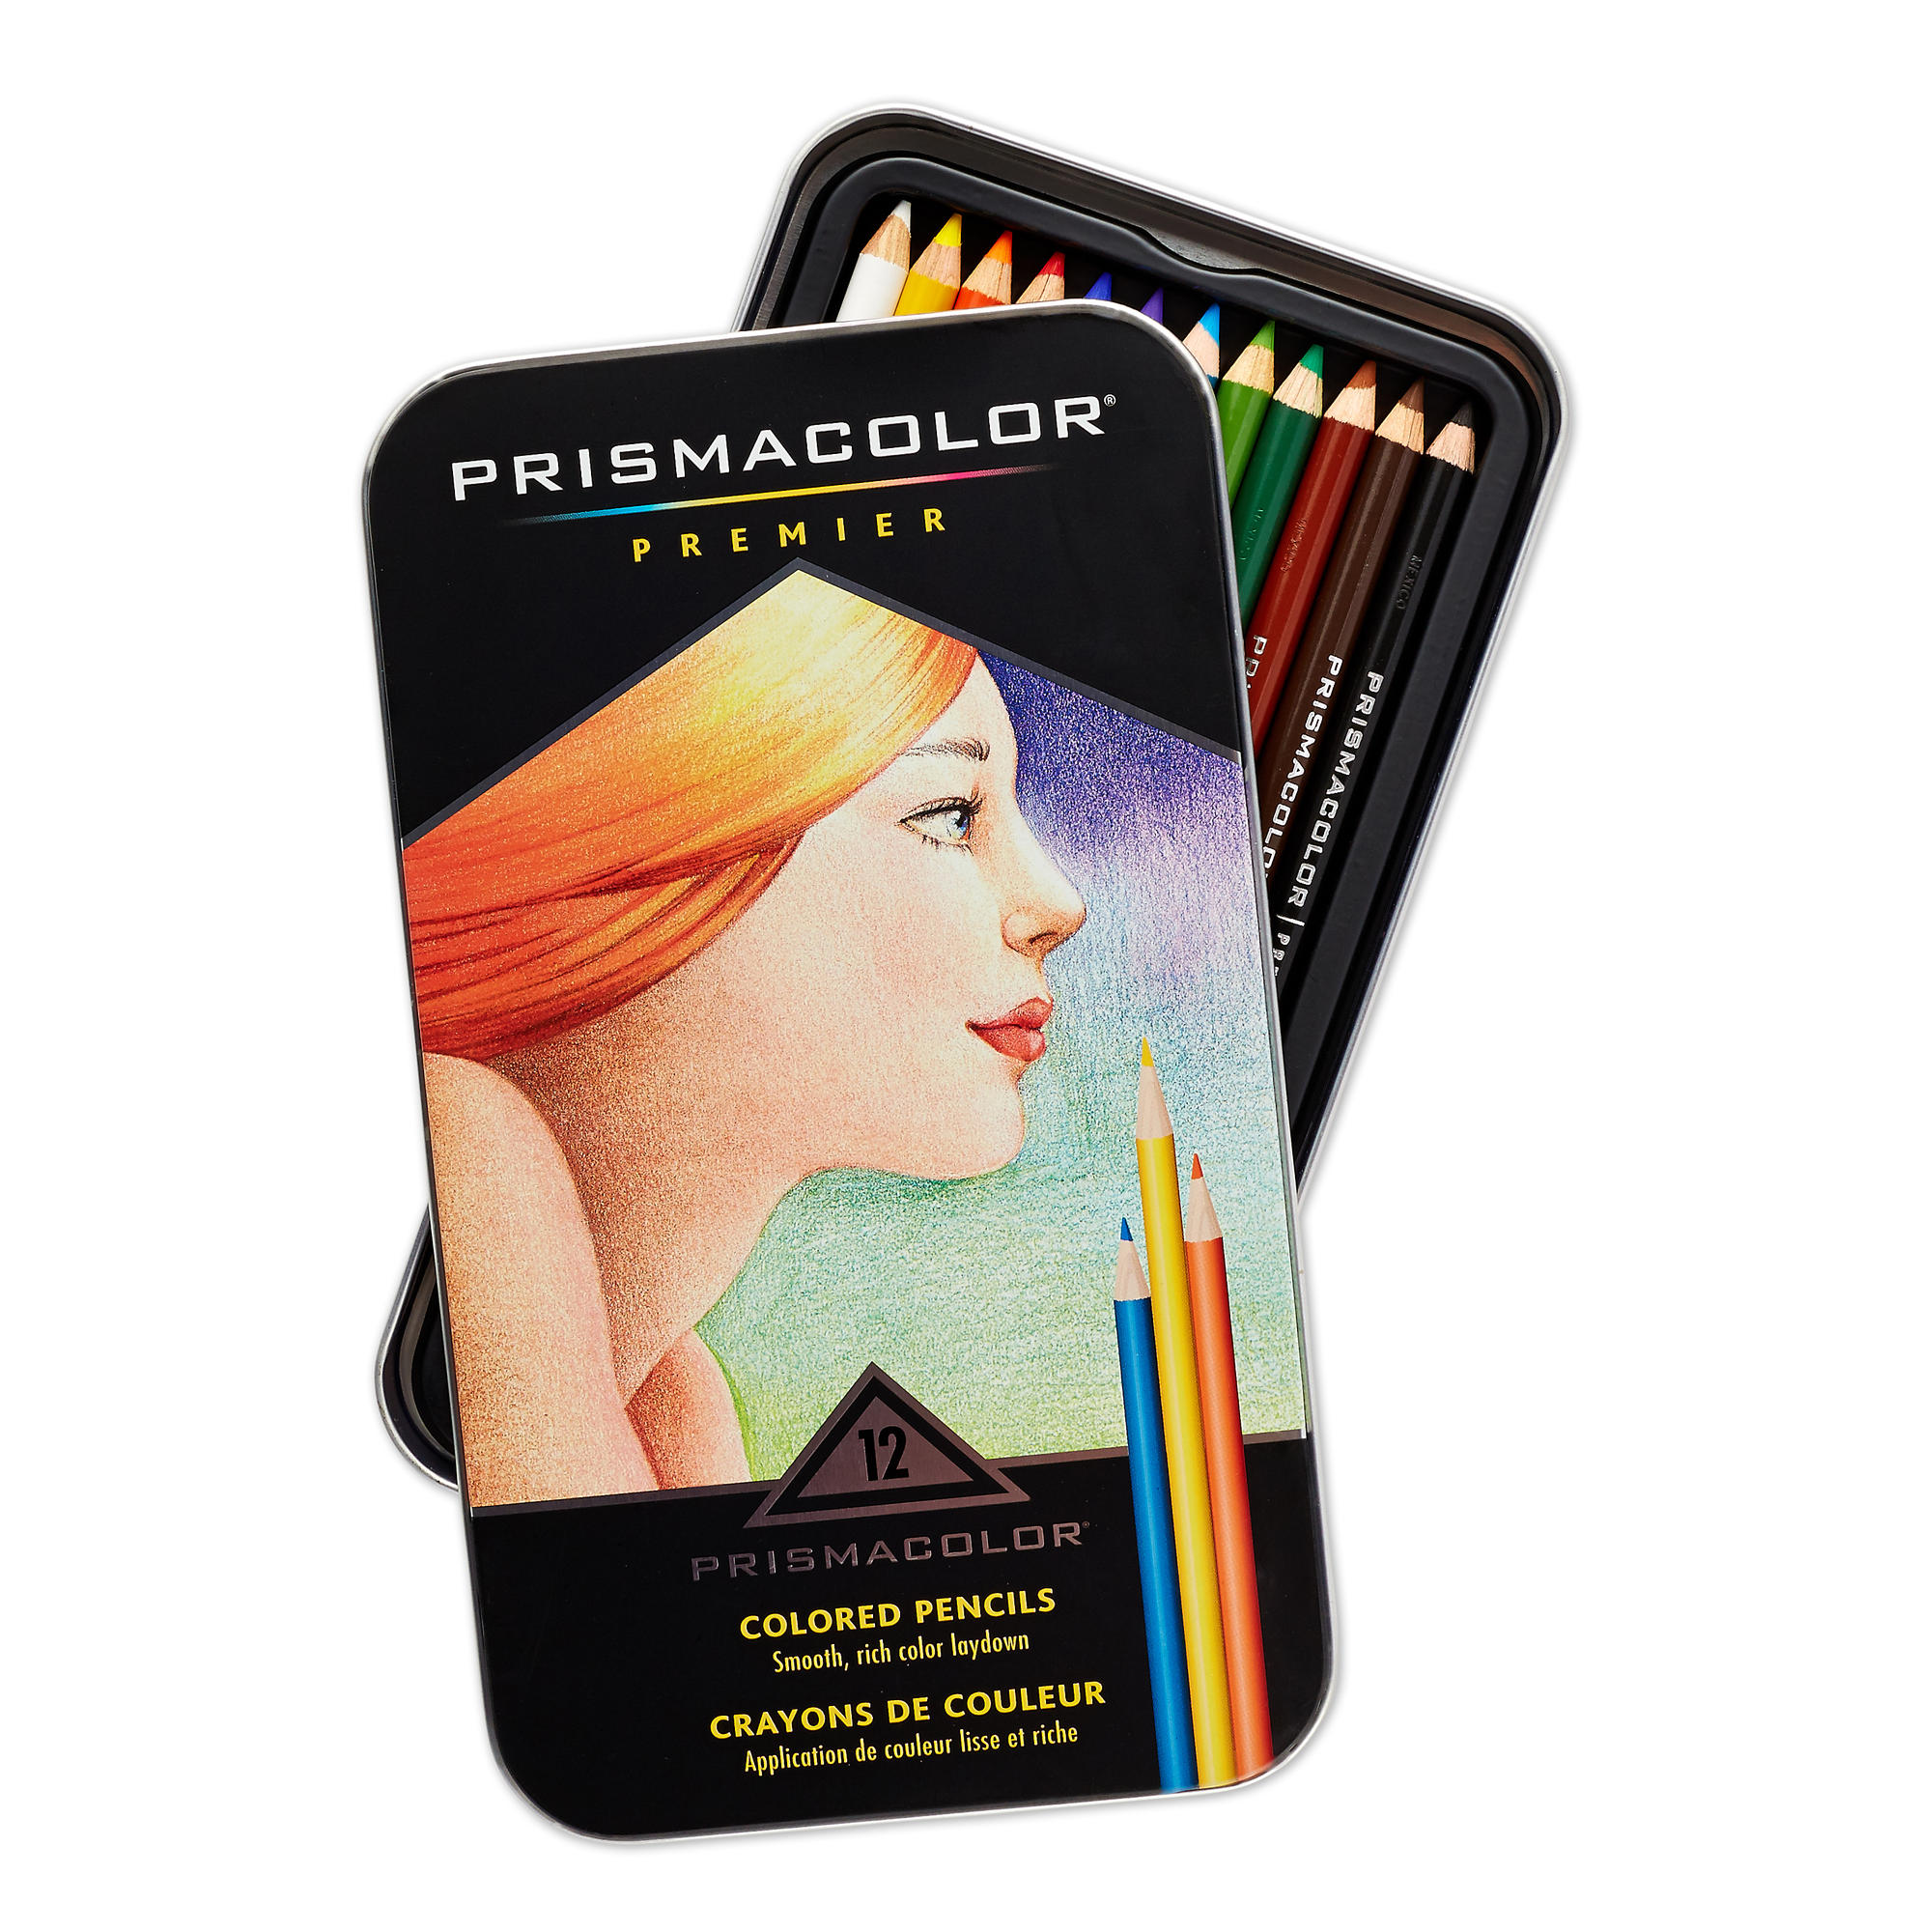 Prismacolor Premier Soft Core Colored Pencil Set Effy Moom Free Coloring Picture wallpaper give a chance to color on the wall without getting in trouble! Fill the walls of your home or office with stress-relieving [effymoom.blogspot.com]